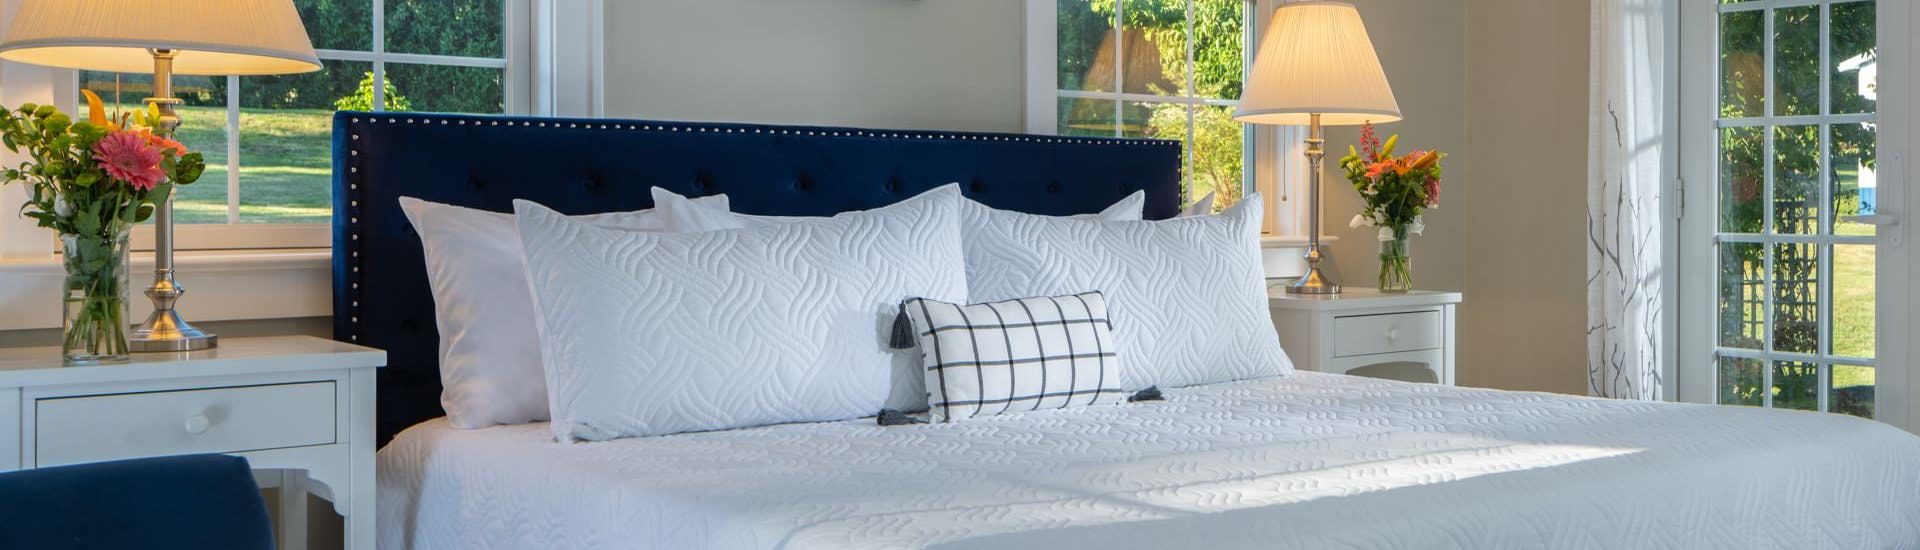 Close up view of navy upholstered bed, white bedding, wooden nightstands with lamps, and windows